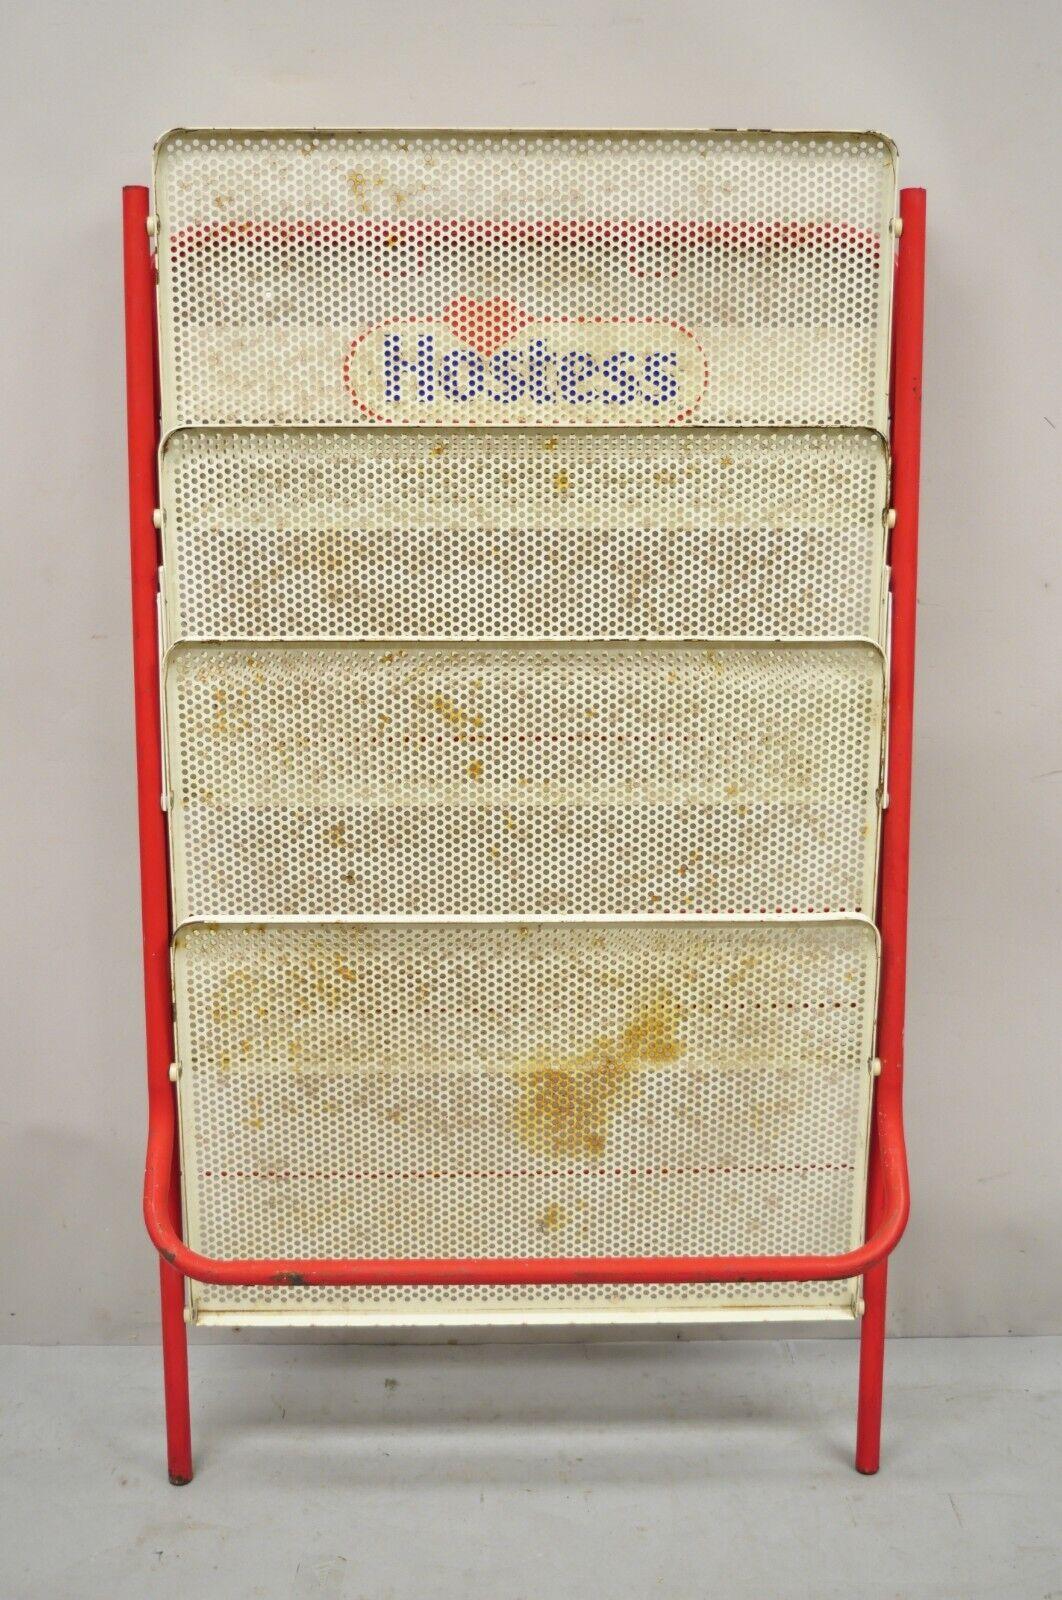 Vintage Hostess Red Metal Perforated 4 Shelf Folding Display Shelf Stand For Sale 2